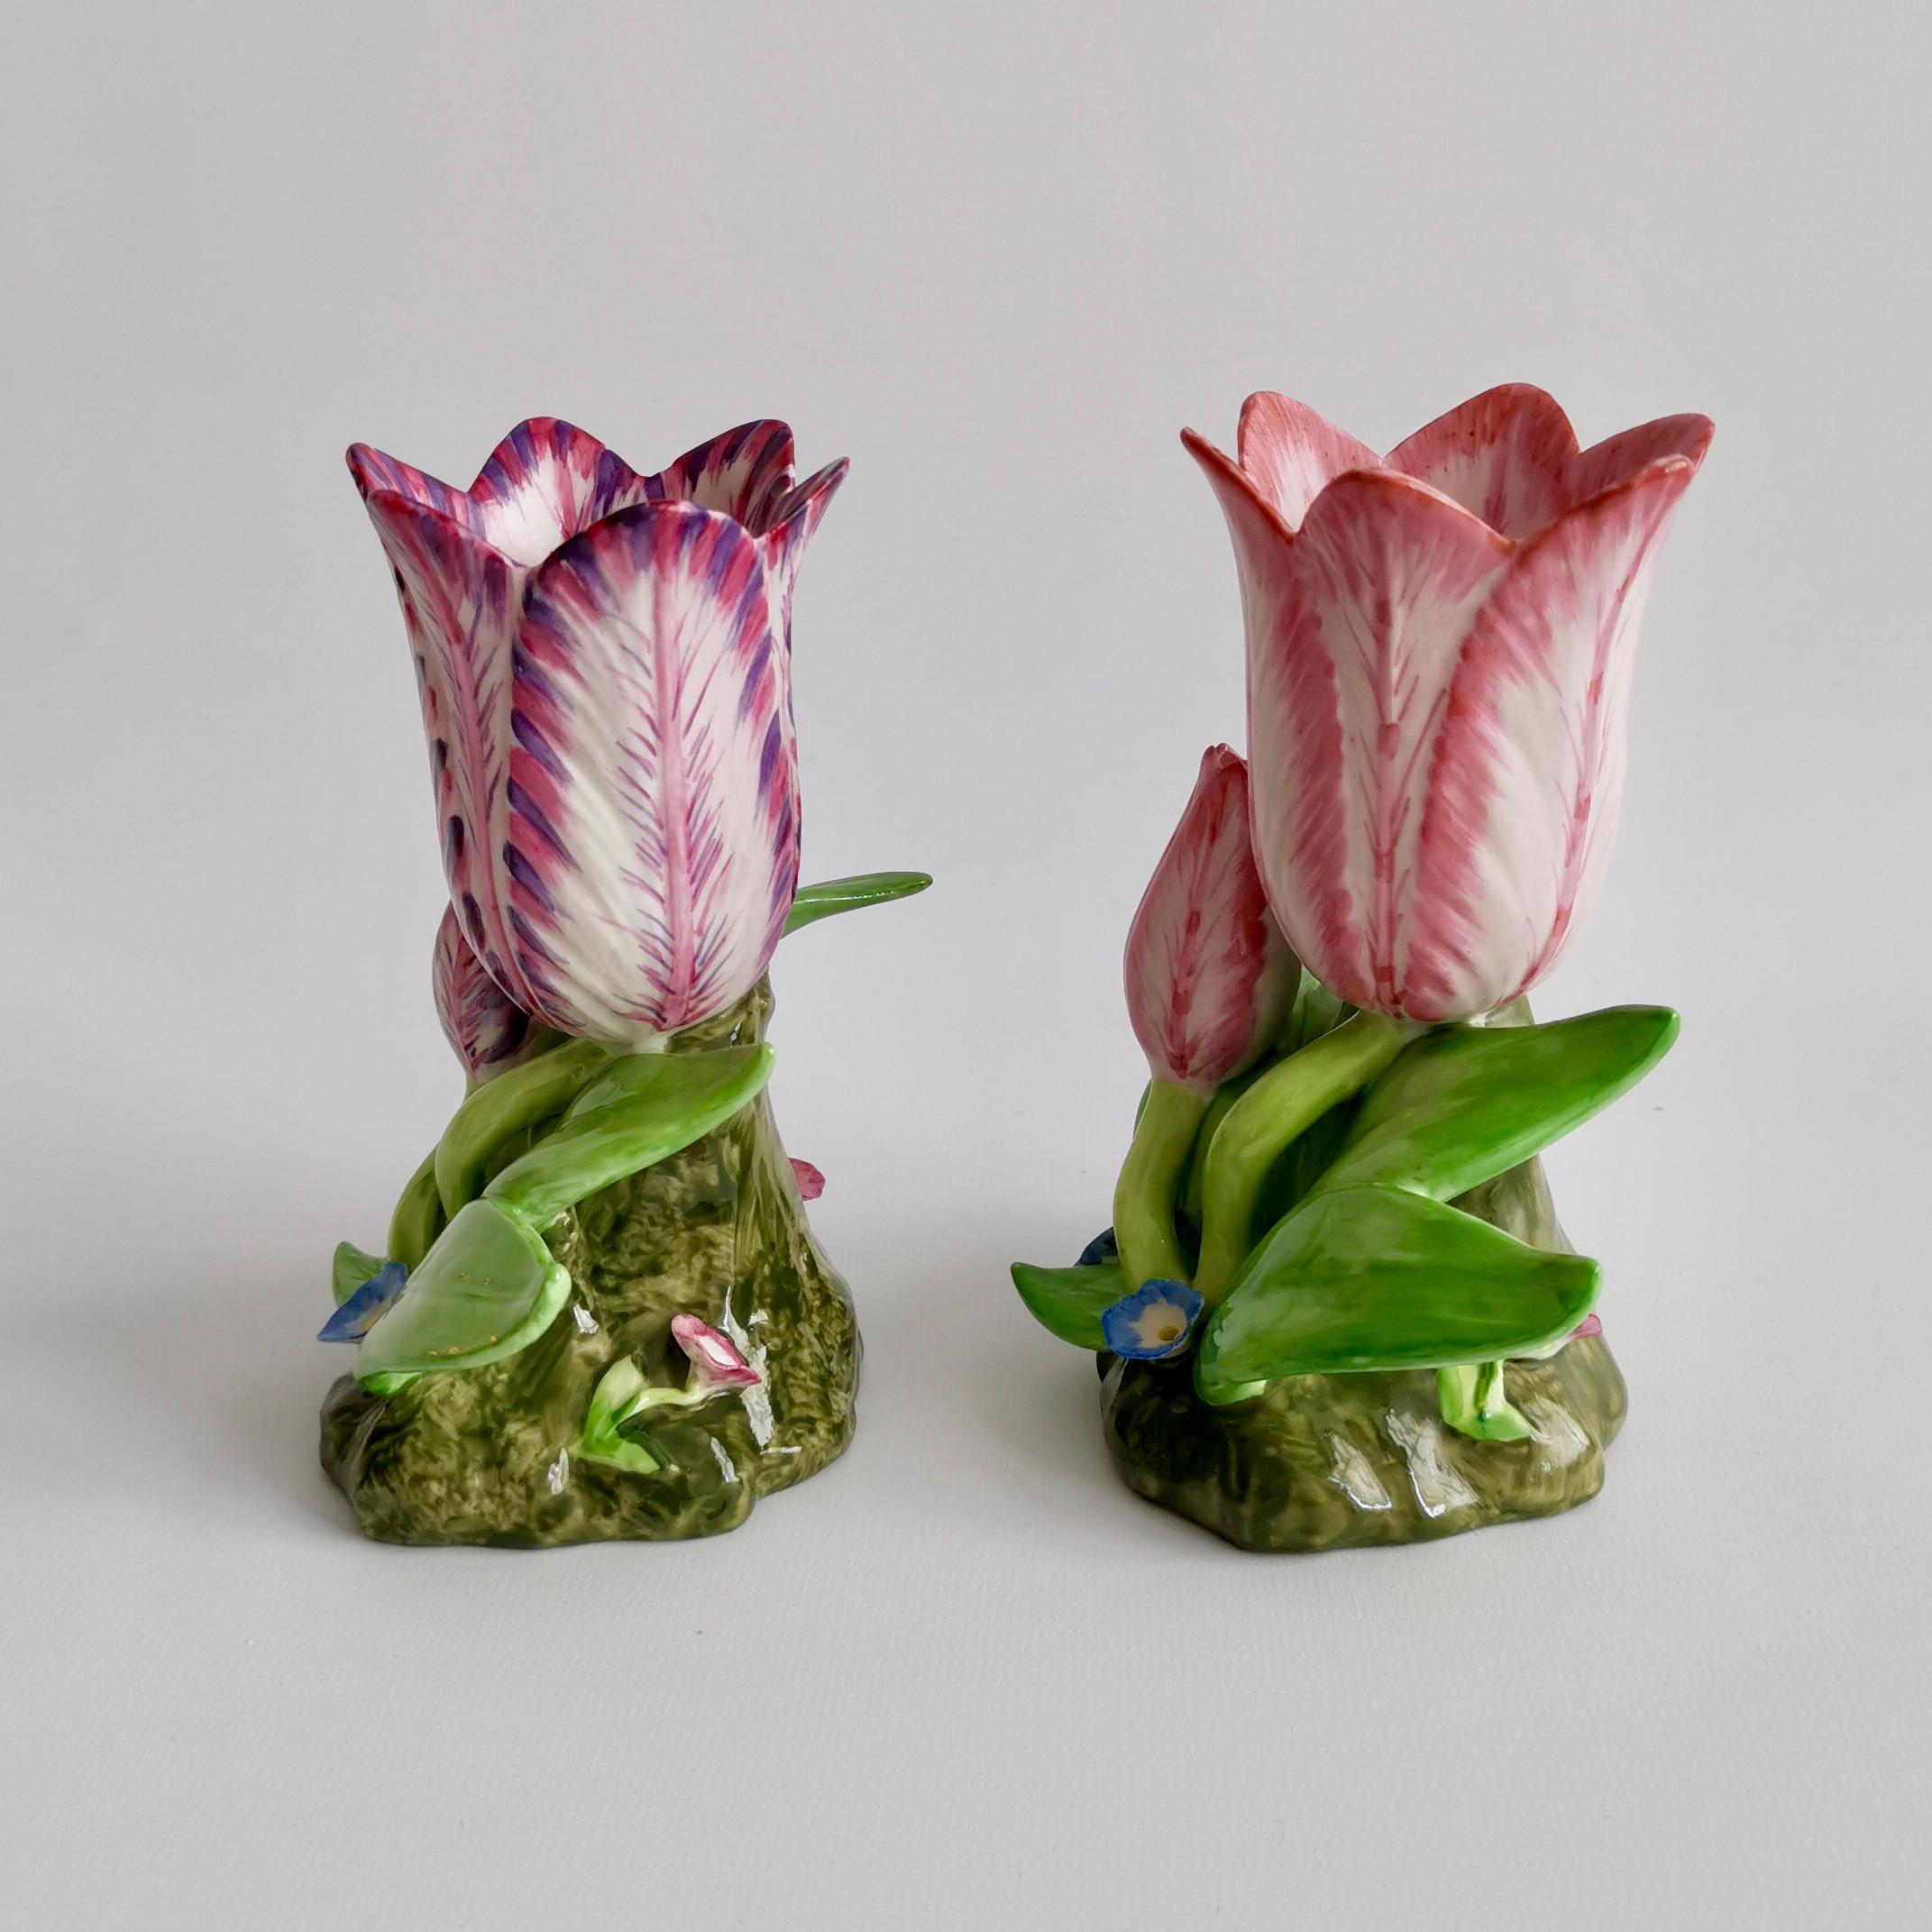 This is a beautiful pair of small tulip vases, originally from the early 19th century but reproduced by Mottahedeh in the second half of the 20th century.

These tulip vases were popular in the early 19th century and were made in pottery by